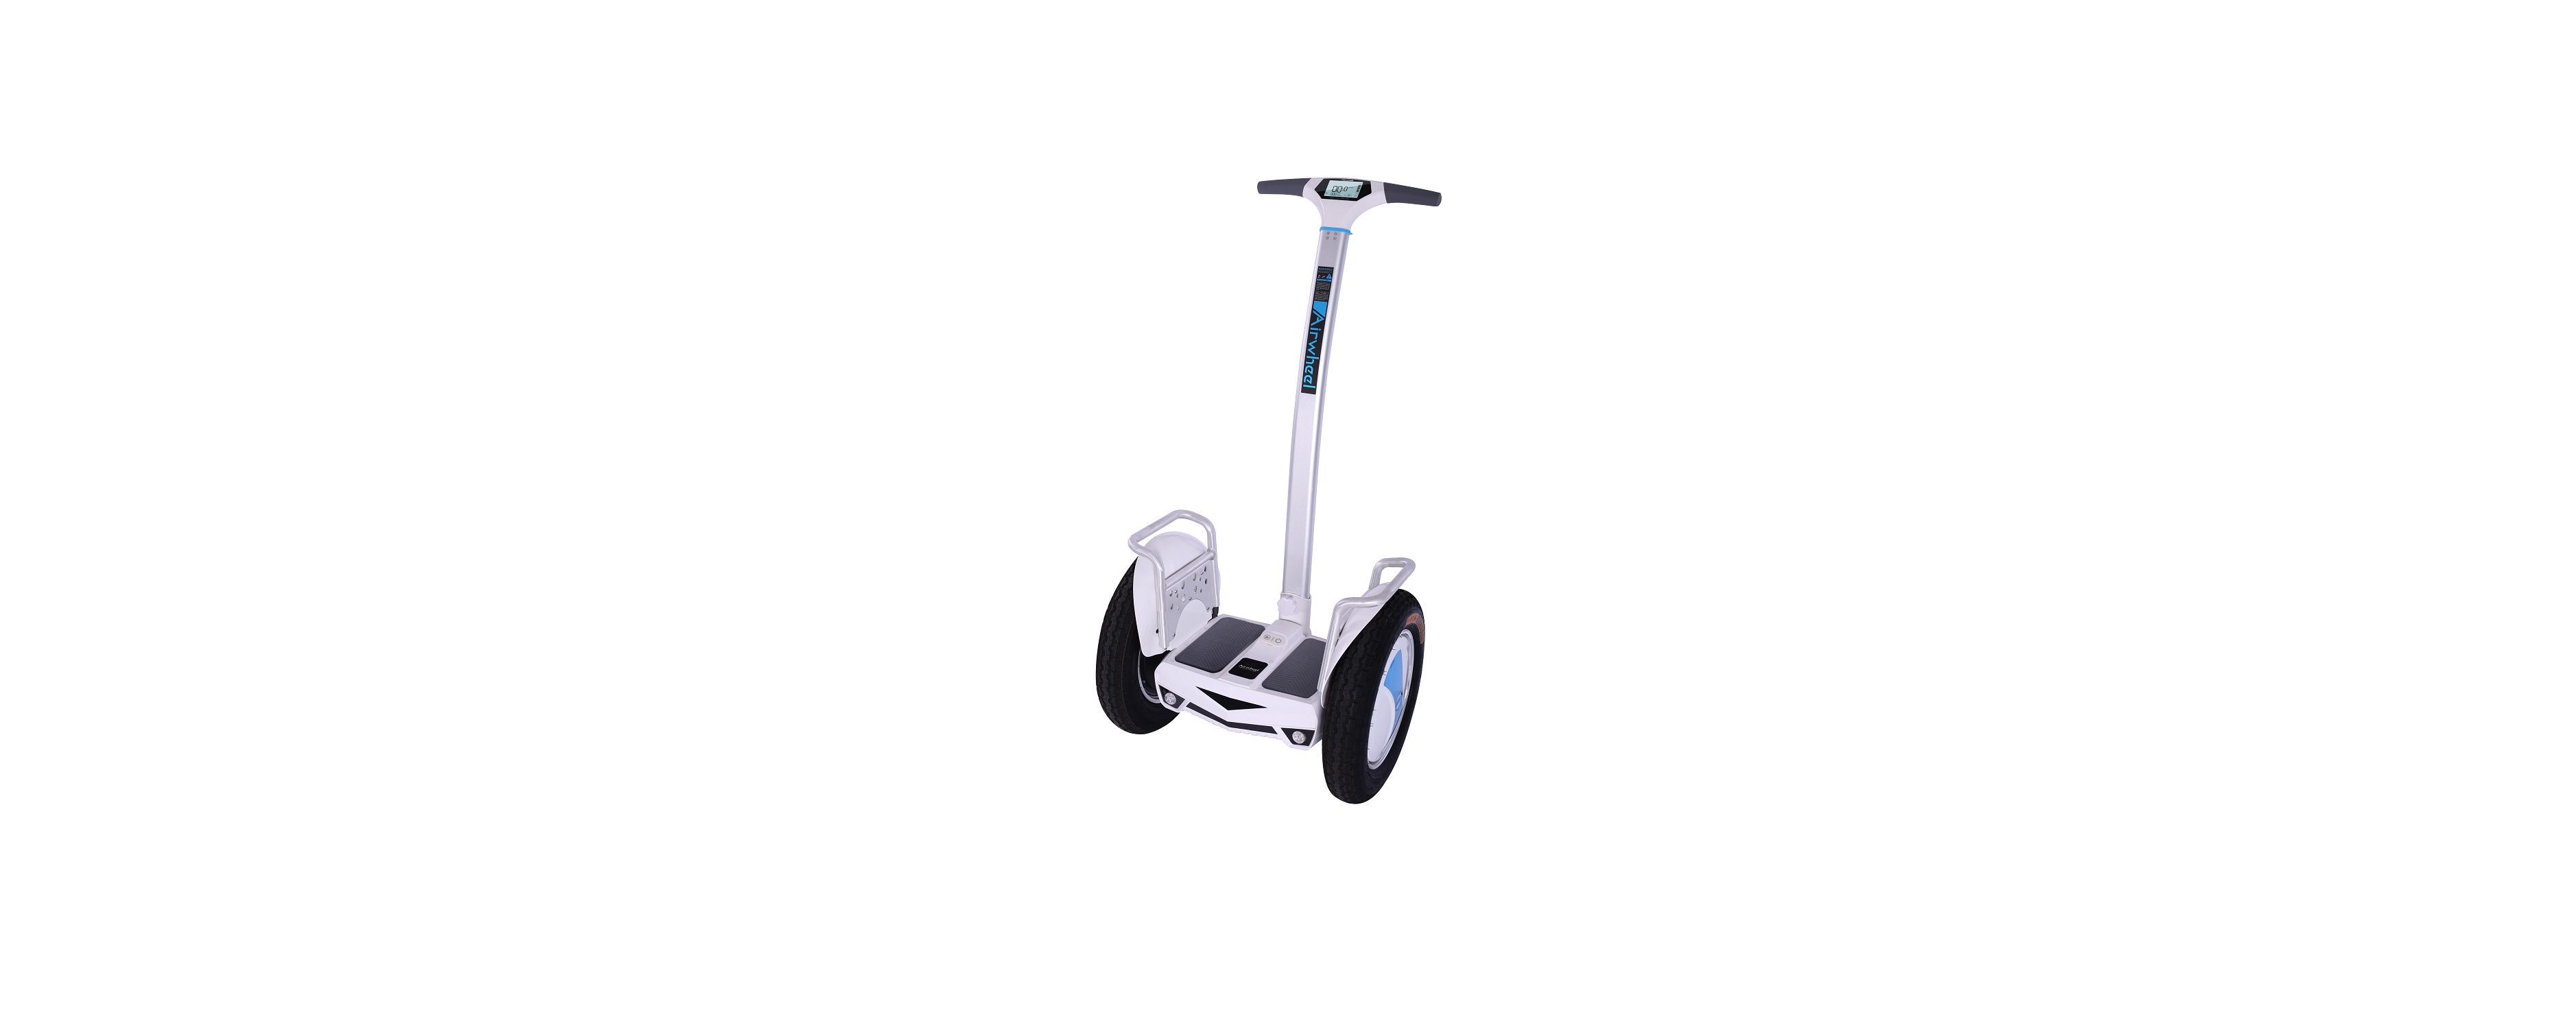 airwheel-s5-safe-scooter-expensive